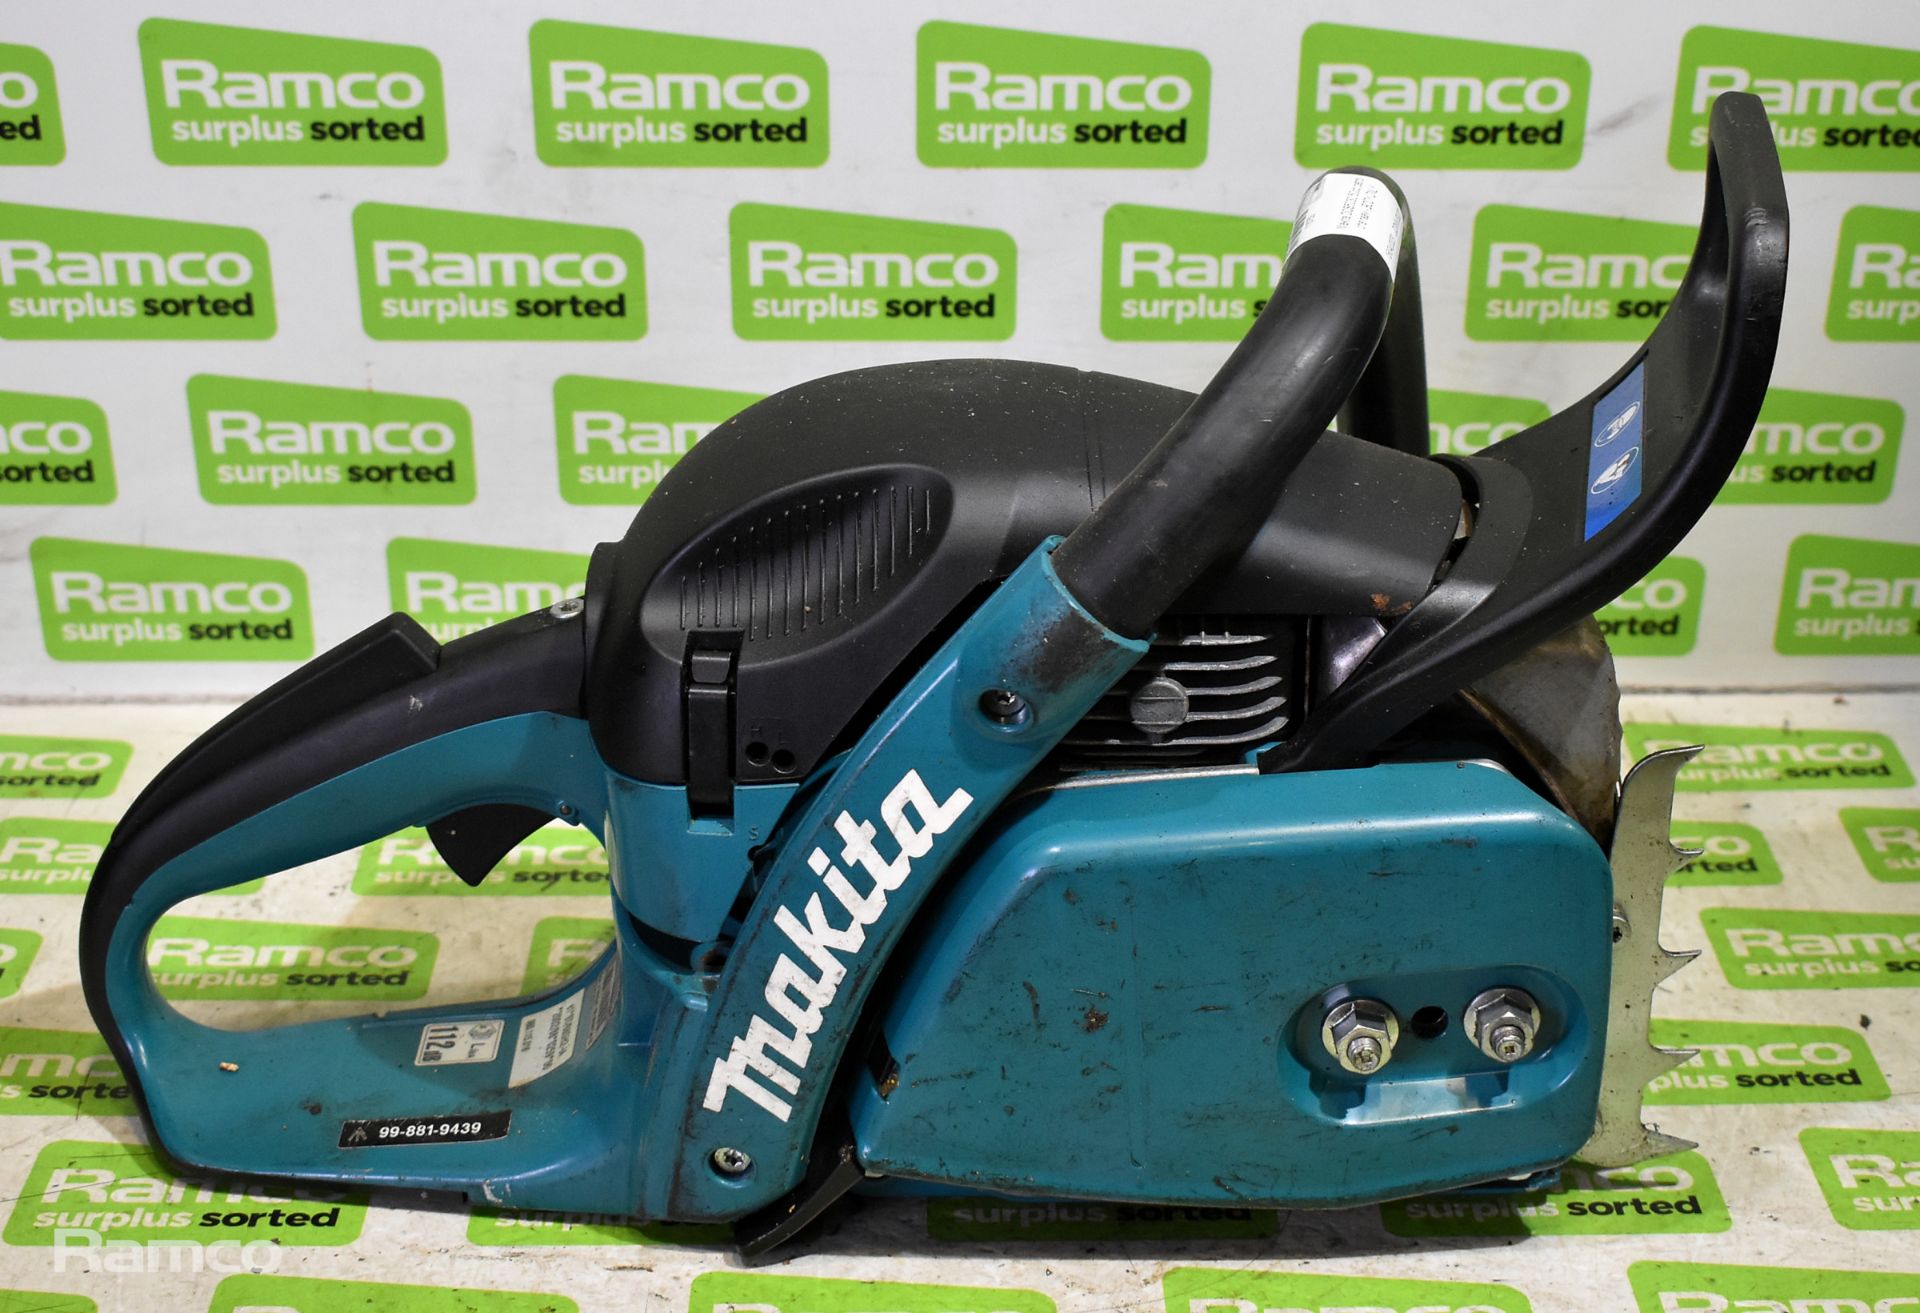 4x Makita DCS5030 50cc petrol chainsaws - BODIES ONLY - AS SPARES OR REPAIRS - Image 12 of 21